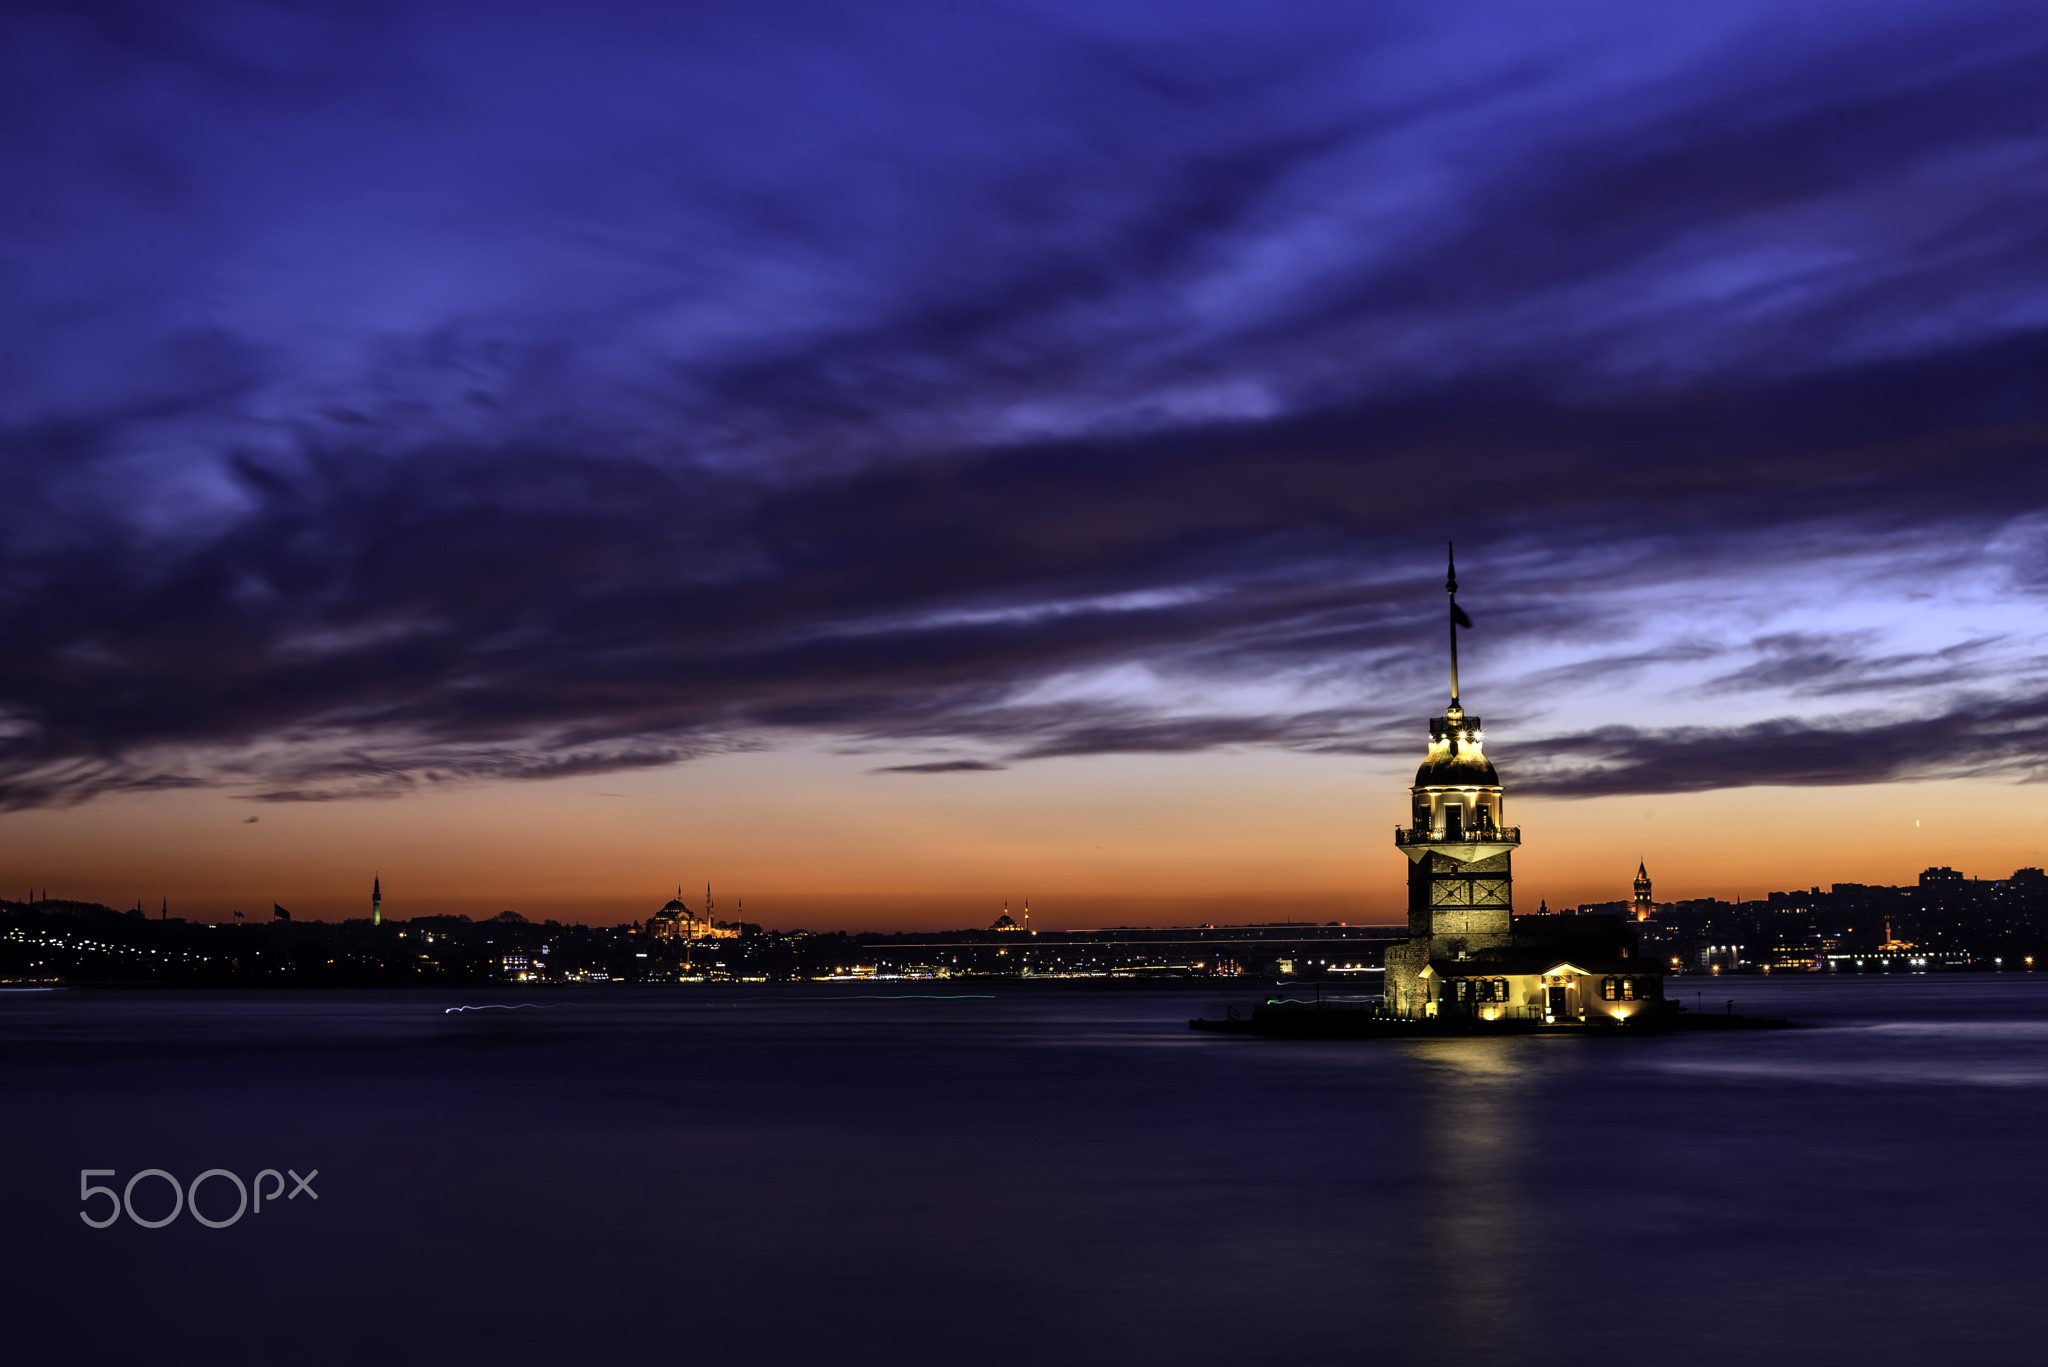 General 2048x1367 500px city lights evening violet Turkey Istanbul island low light watermarked